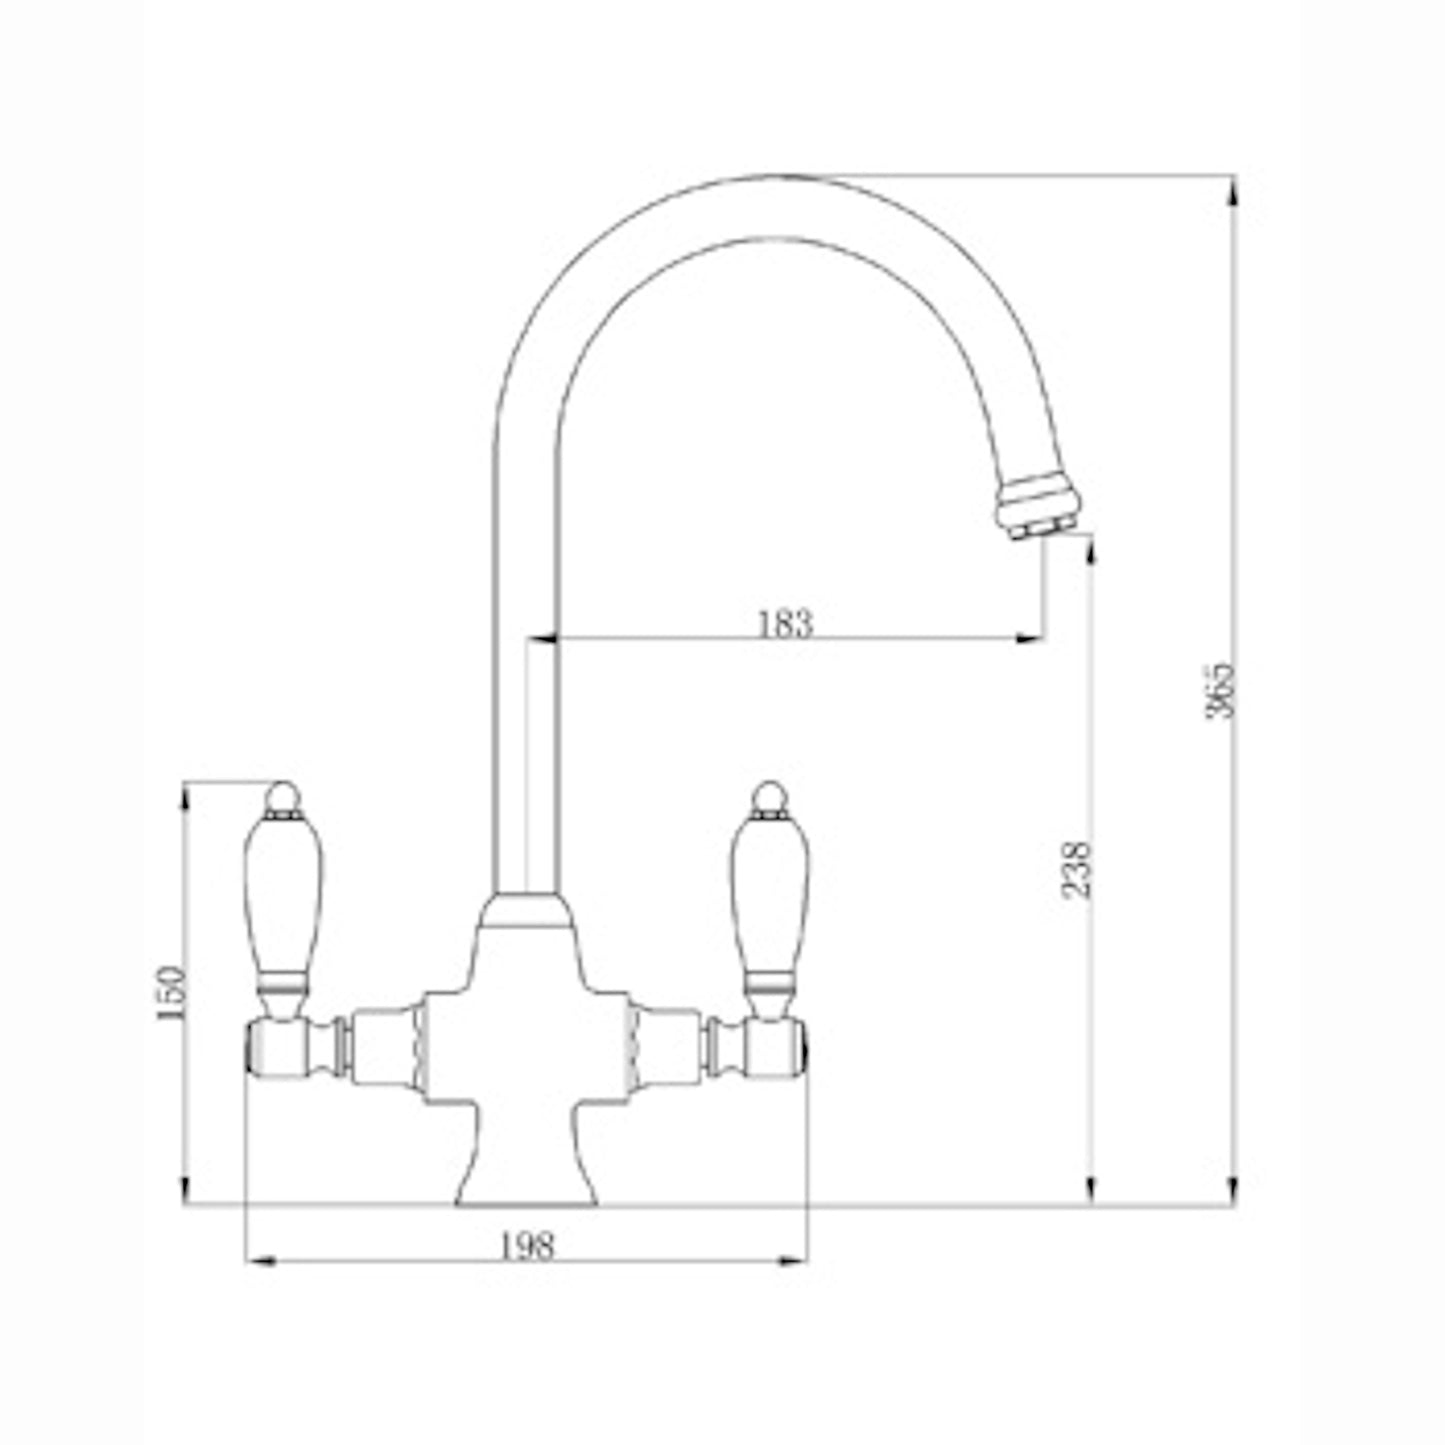 Dorchester Georgian dual flow kitchen sink tap with twin white levers - black